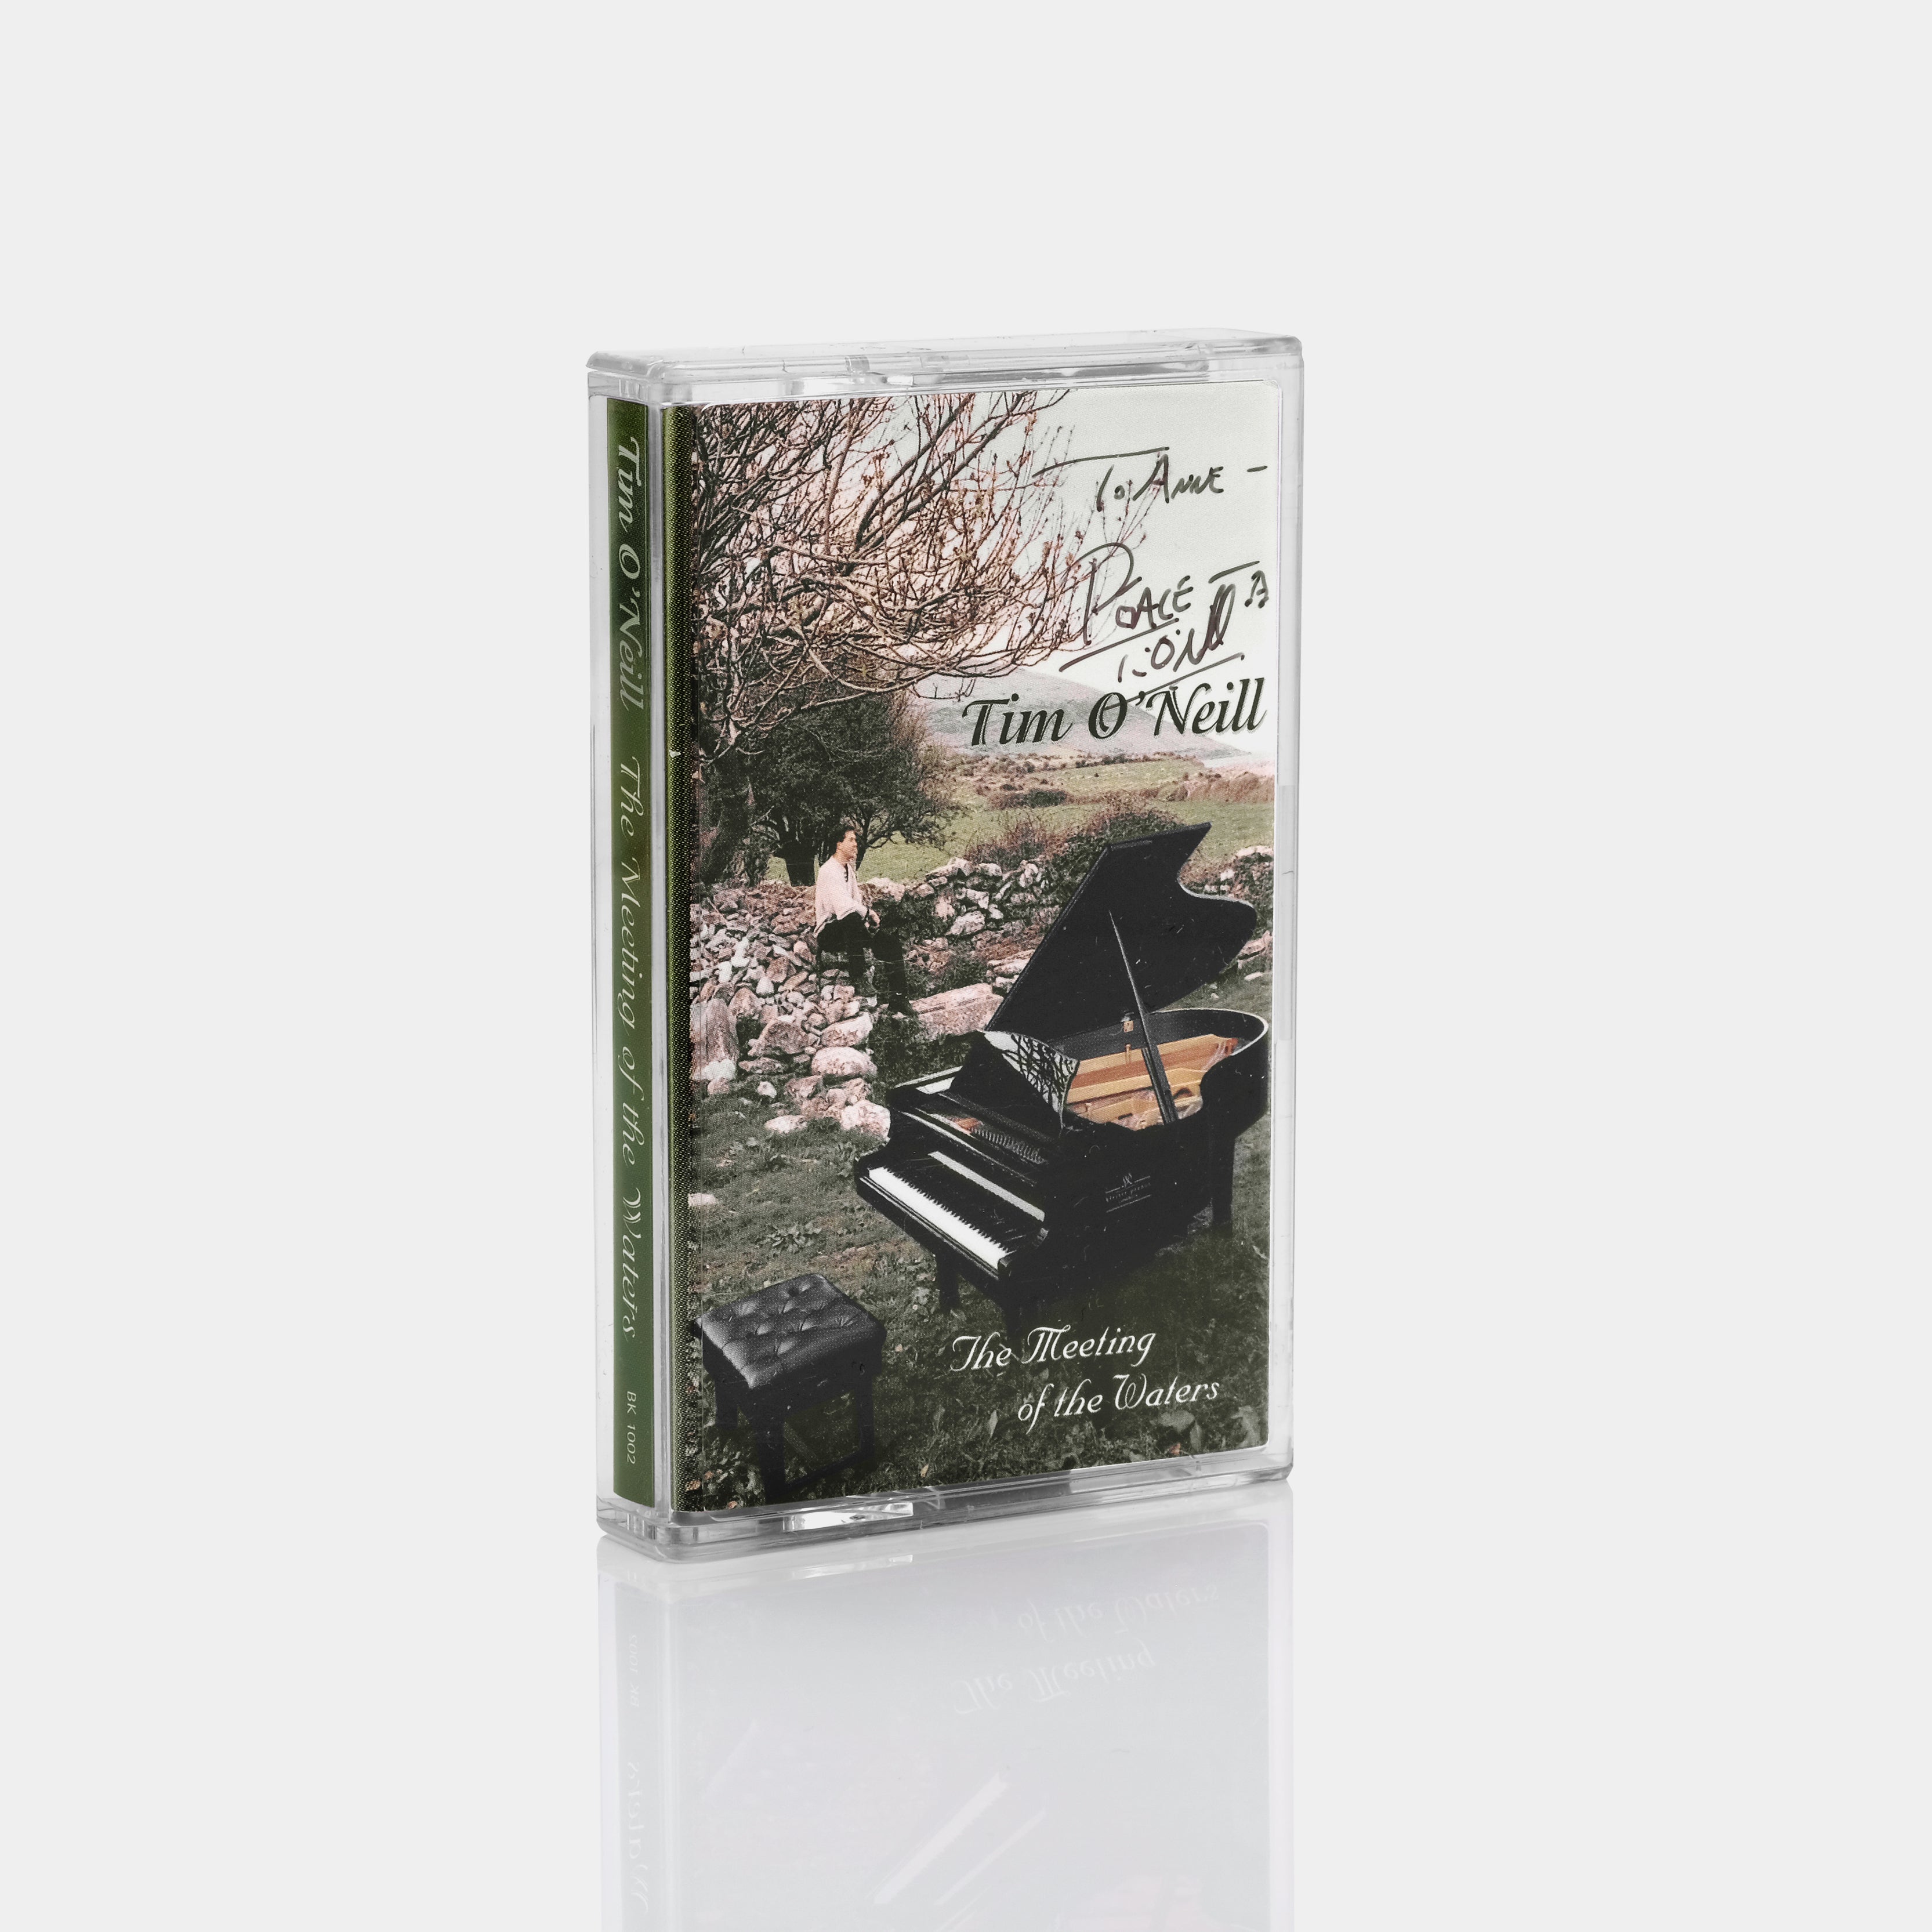 Tim O'Neill - The Meeting Of The Waters Cassette Tape